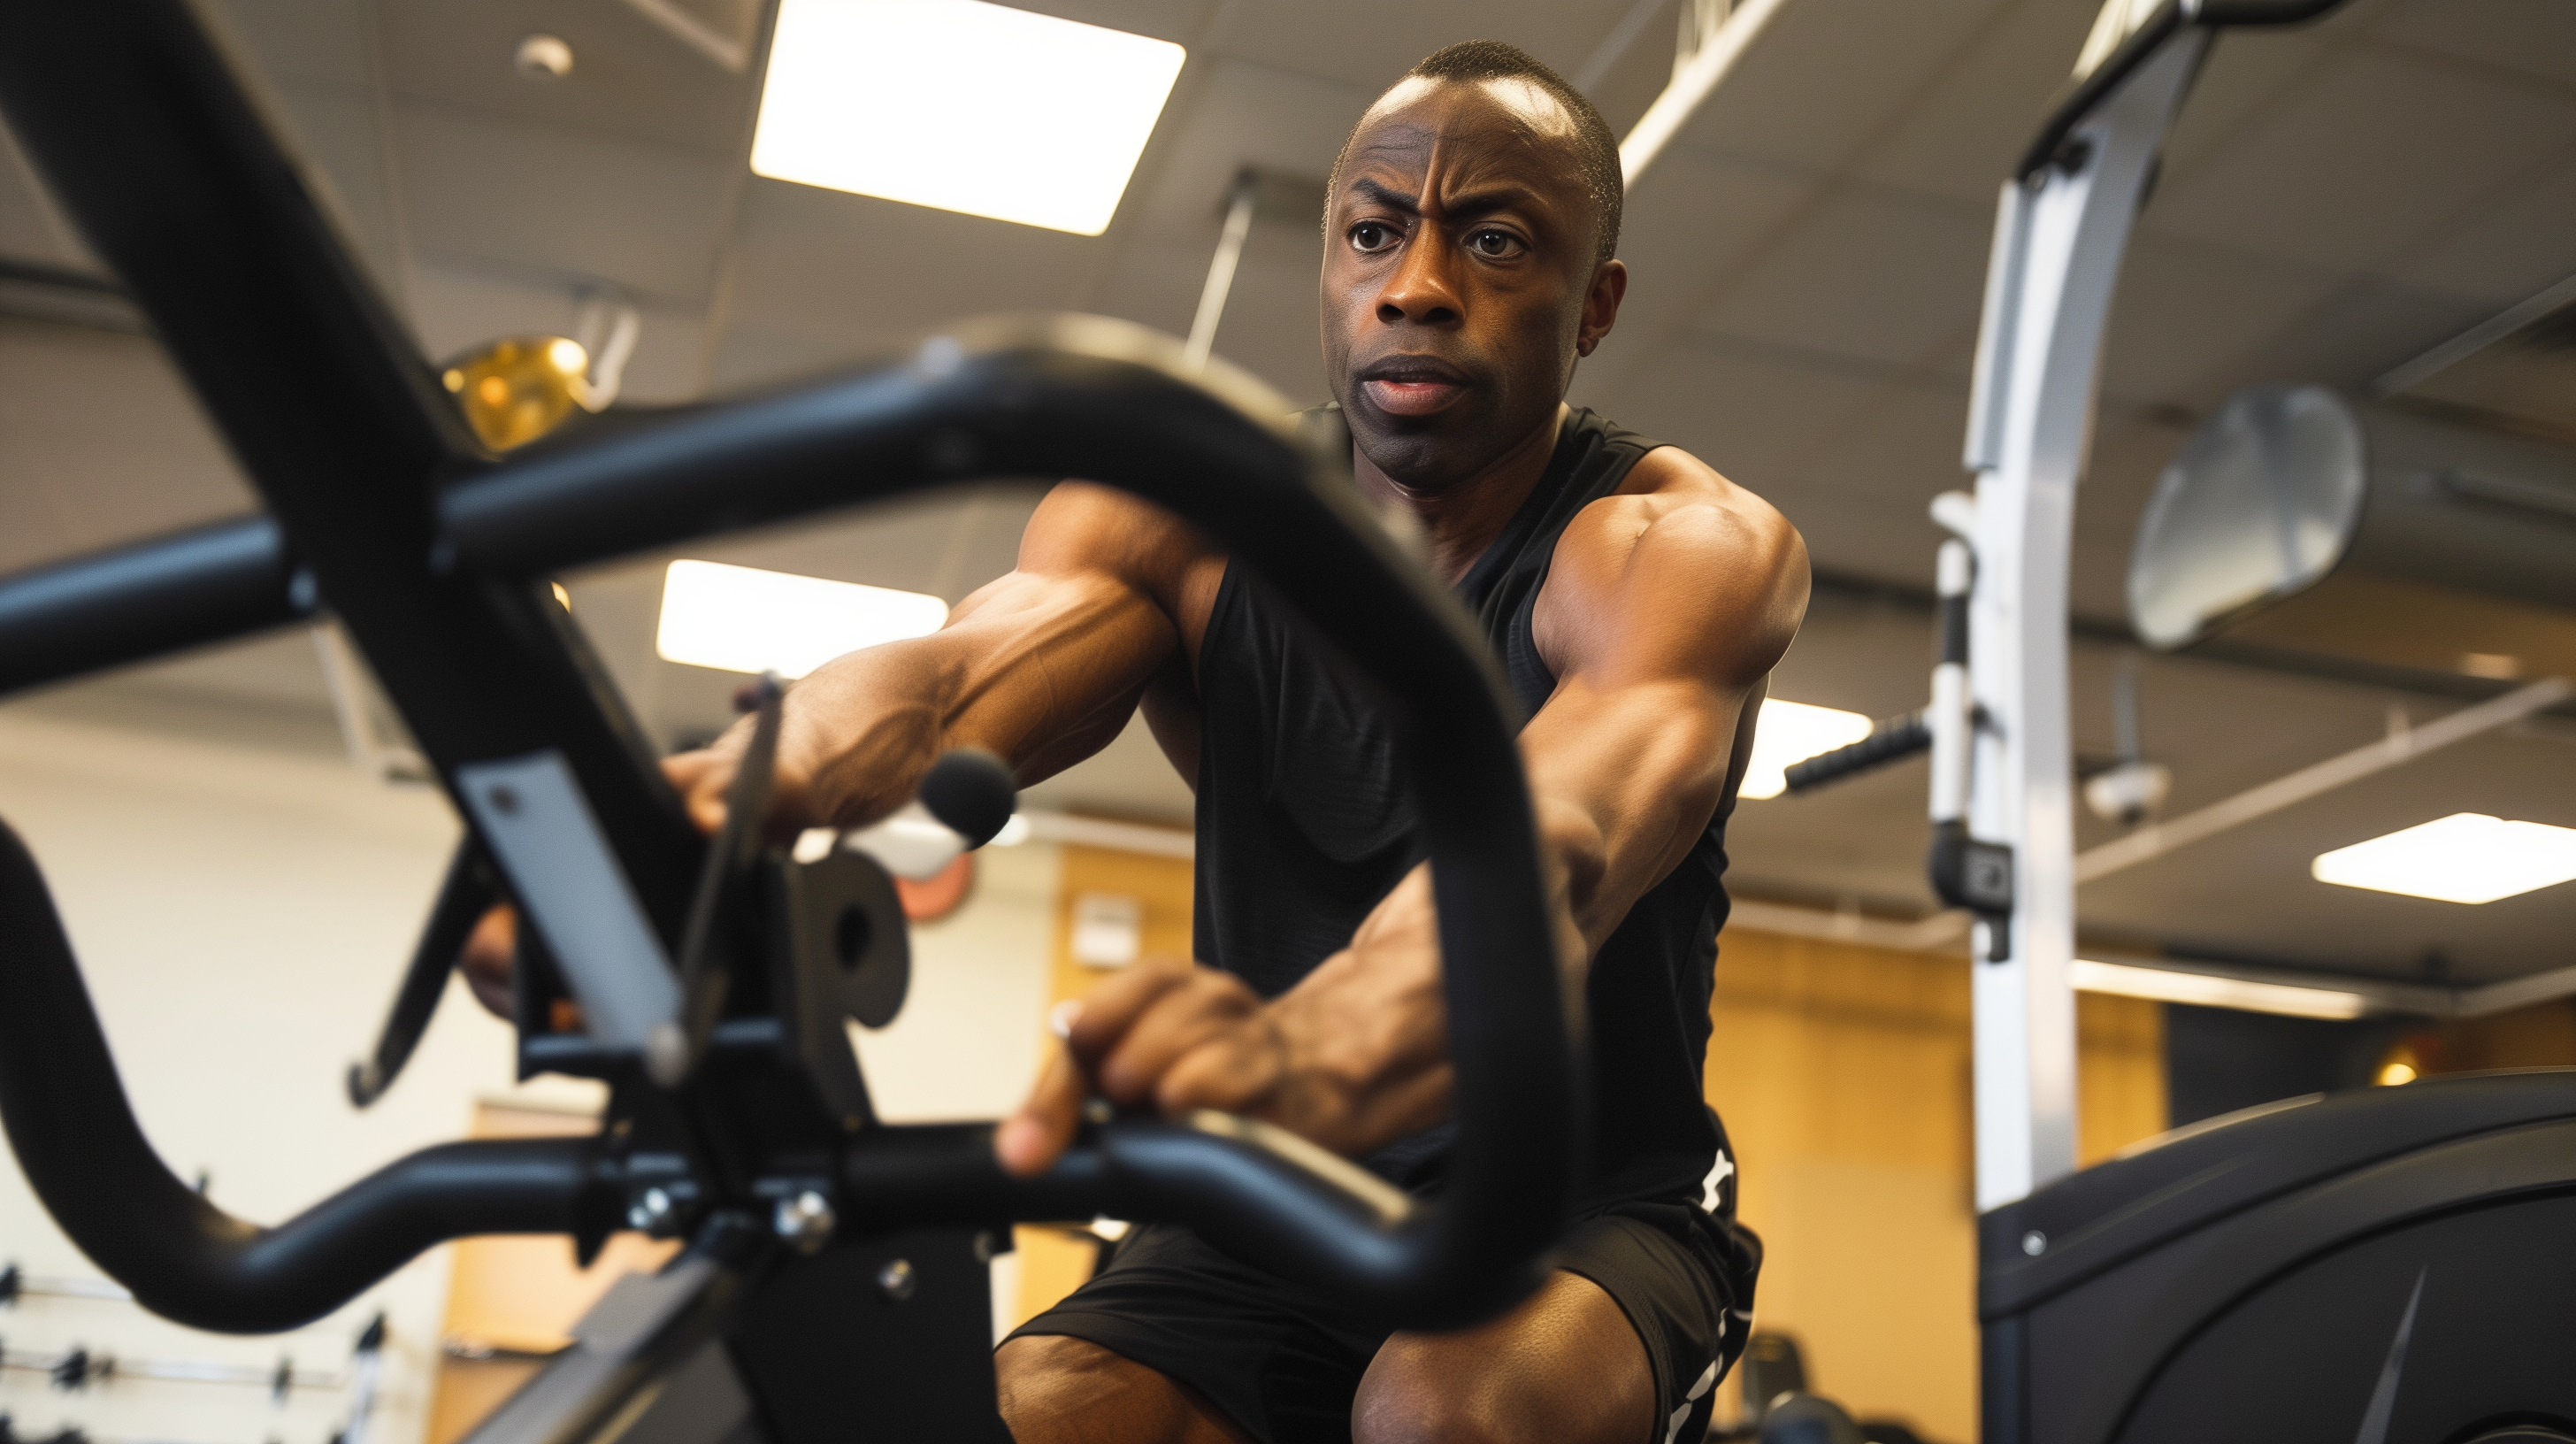 a man working out on a stationary bike - fasted cardio